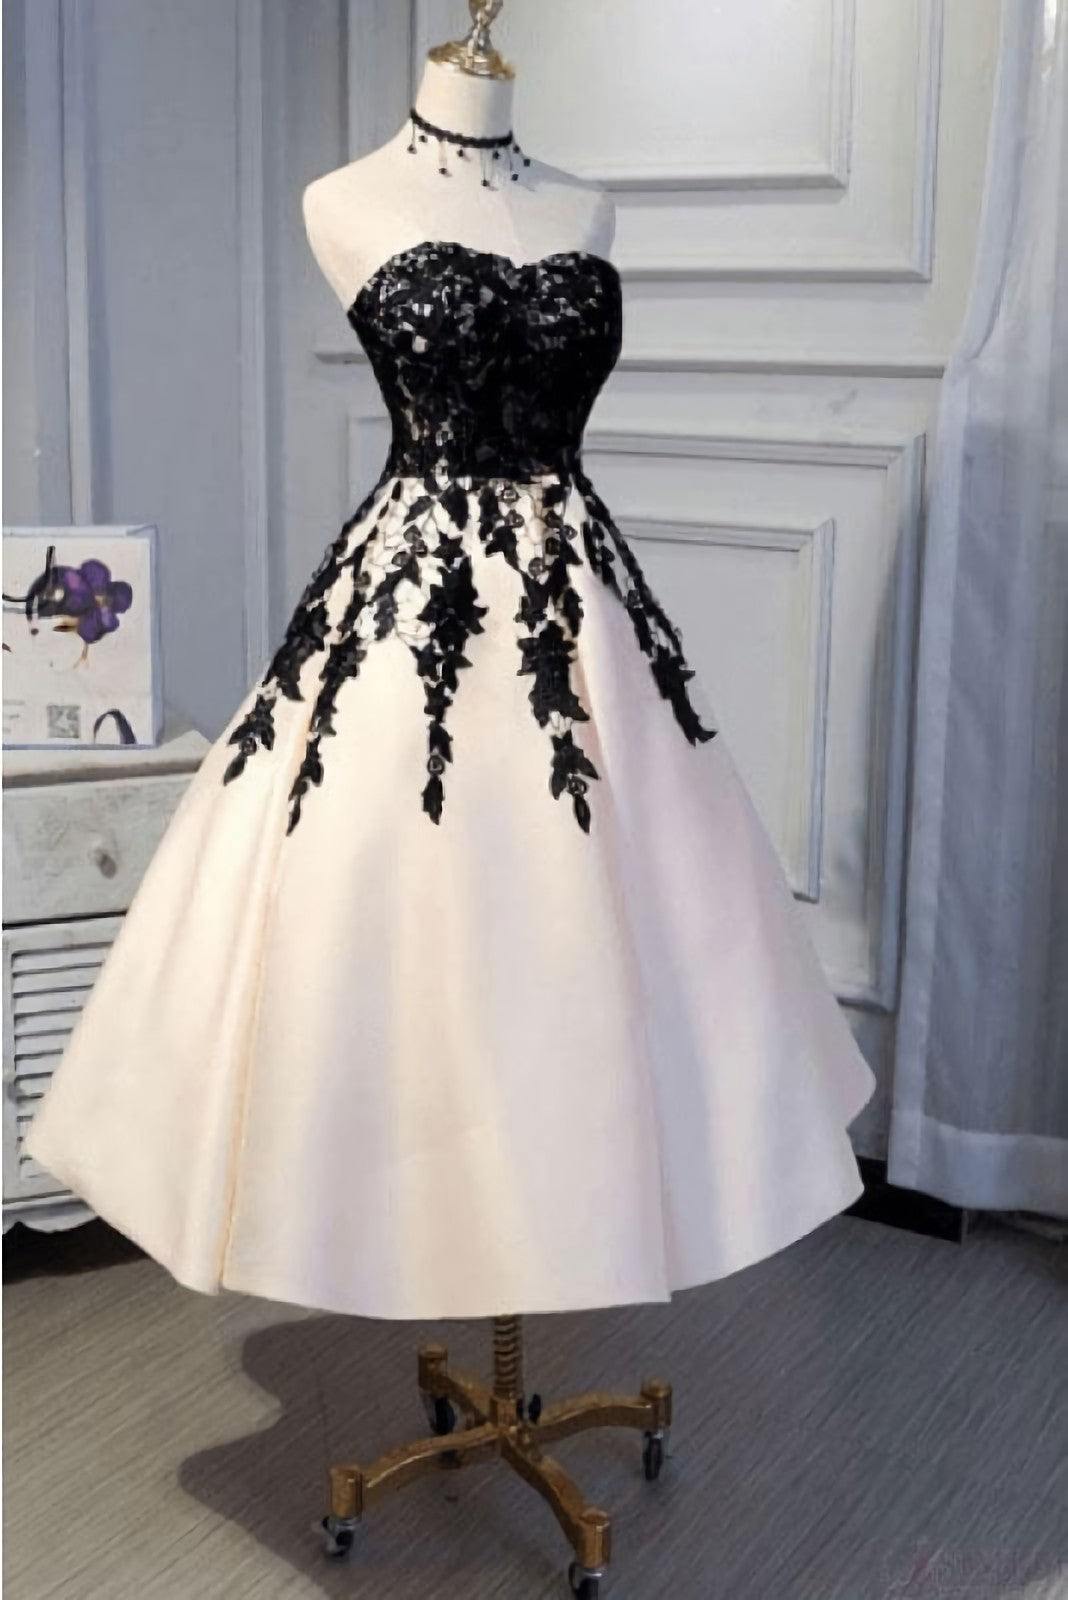 Classy Dress Outfit, Ankle Length Strapless with Black Lace A Line Princess Homecoming Dresses